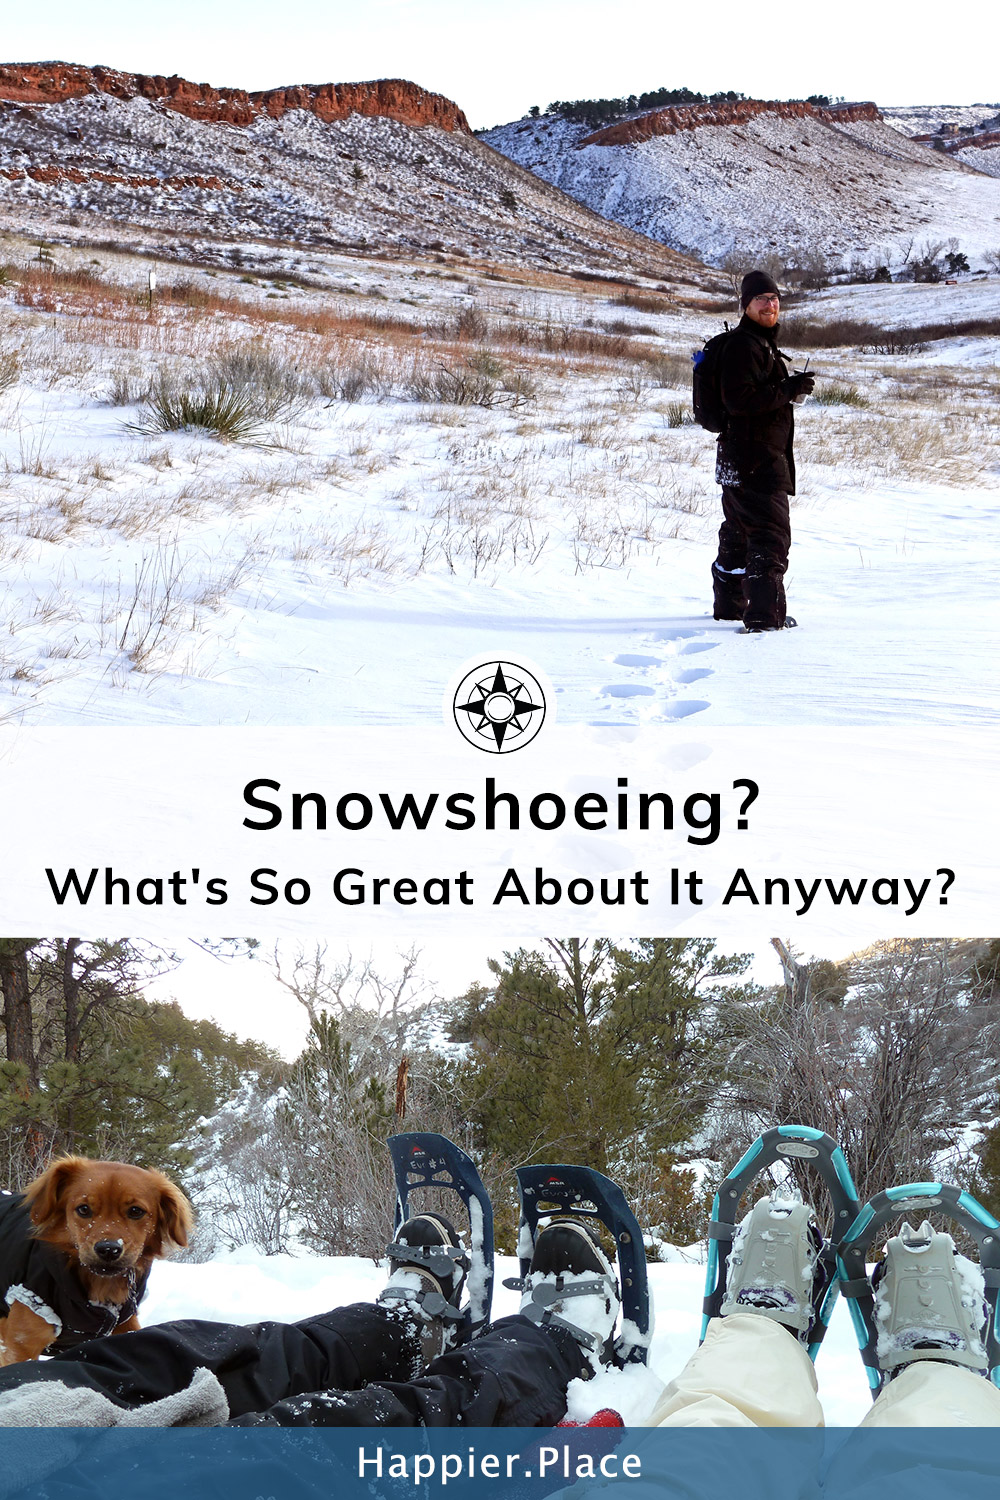 What's so great about snowshoeing anyway?